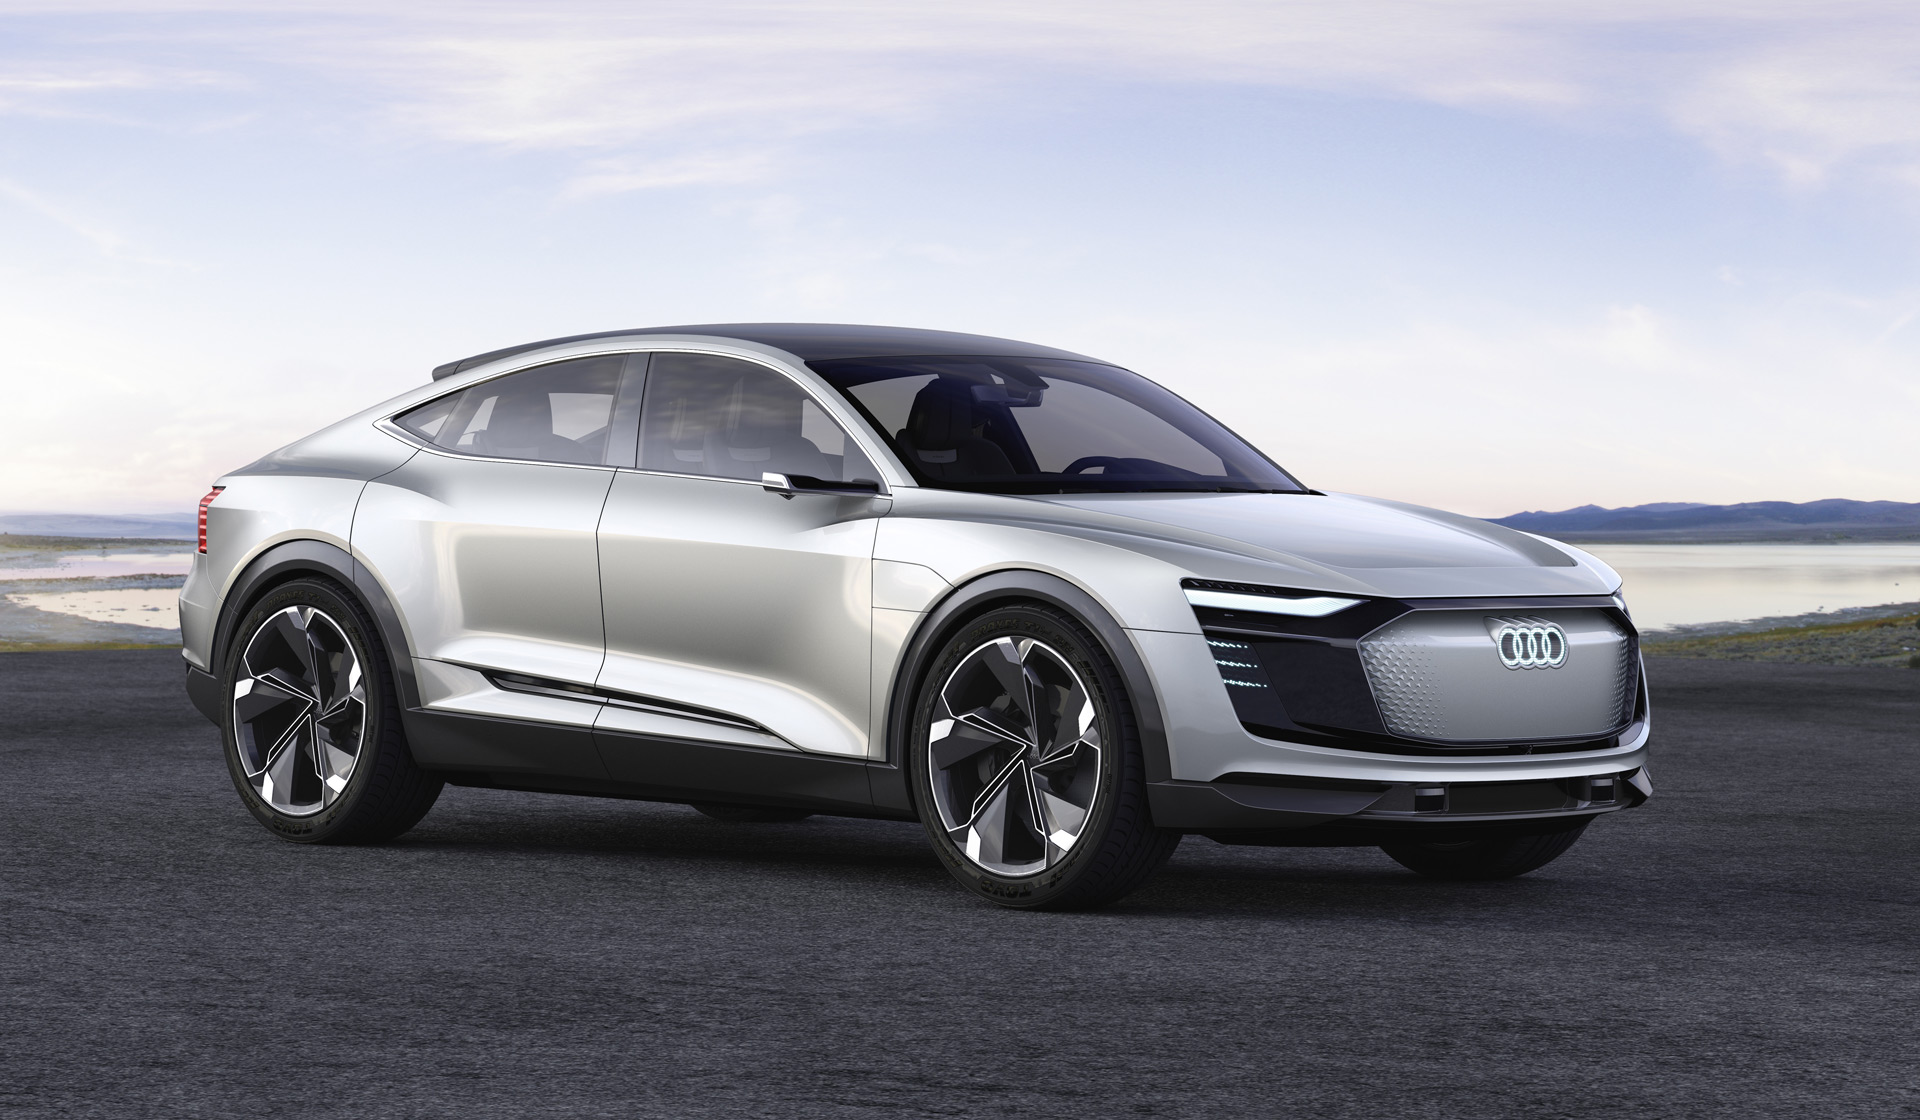 Audi’s Plan to Go Electric